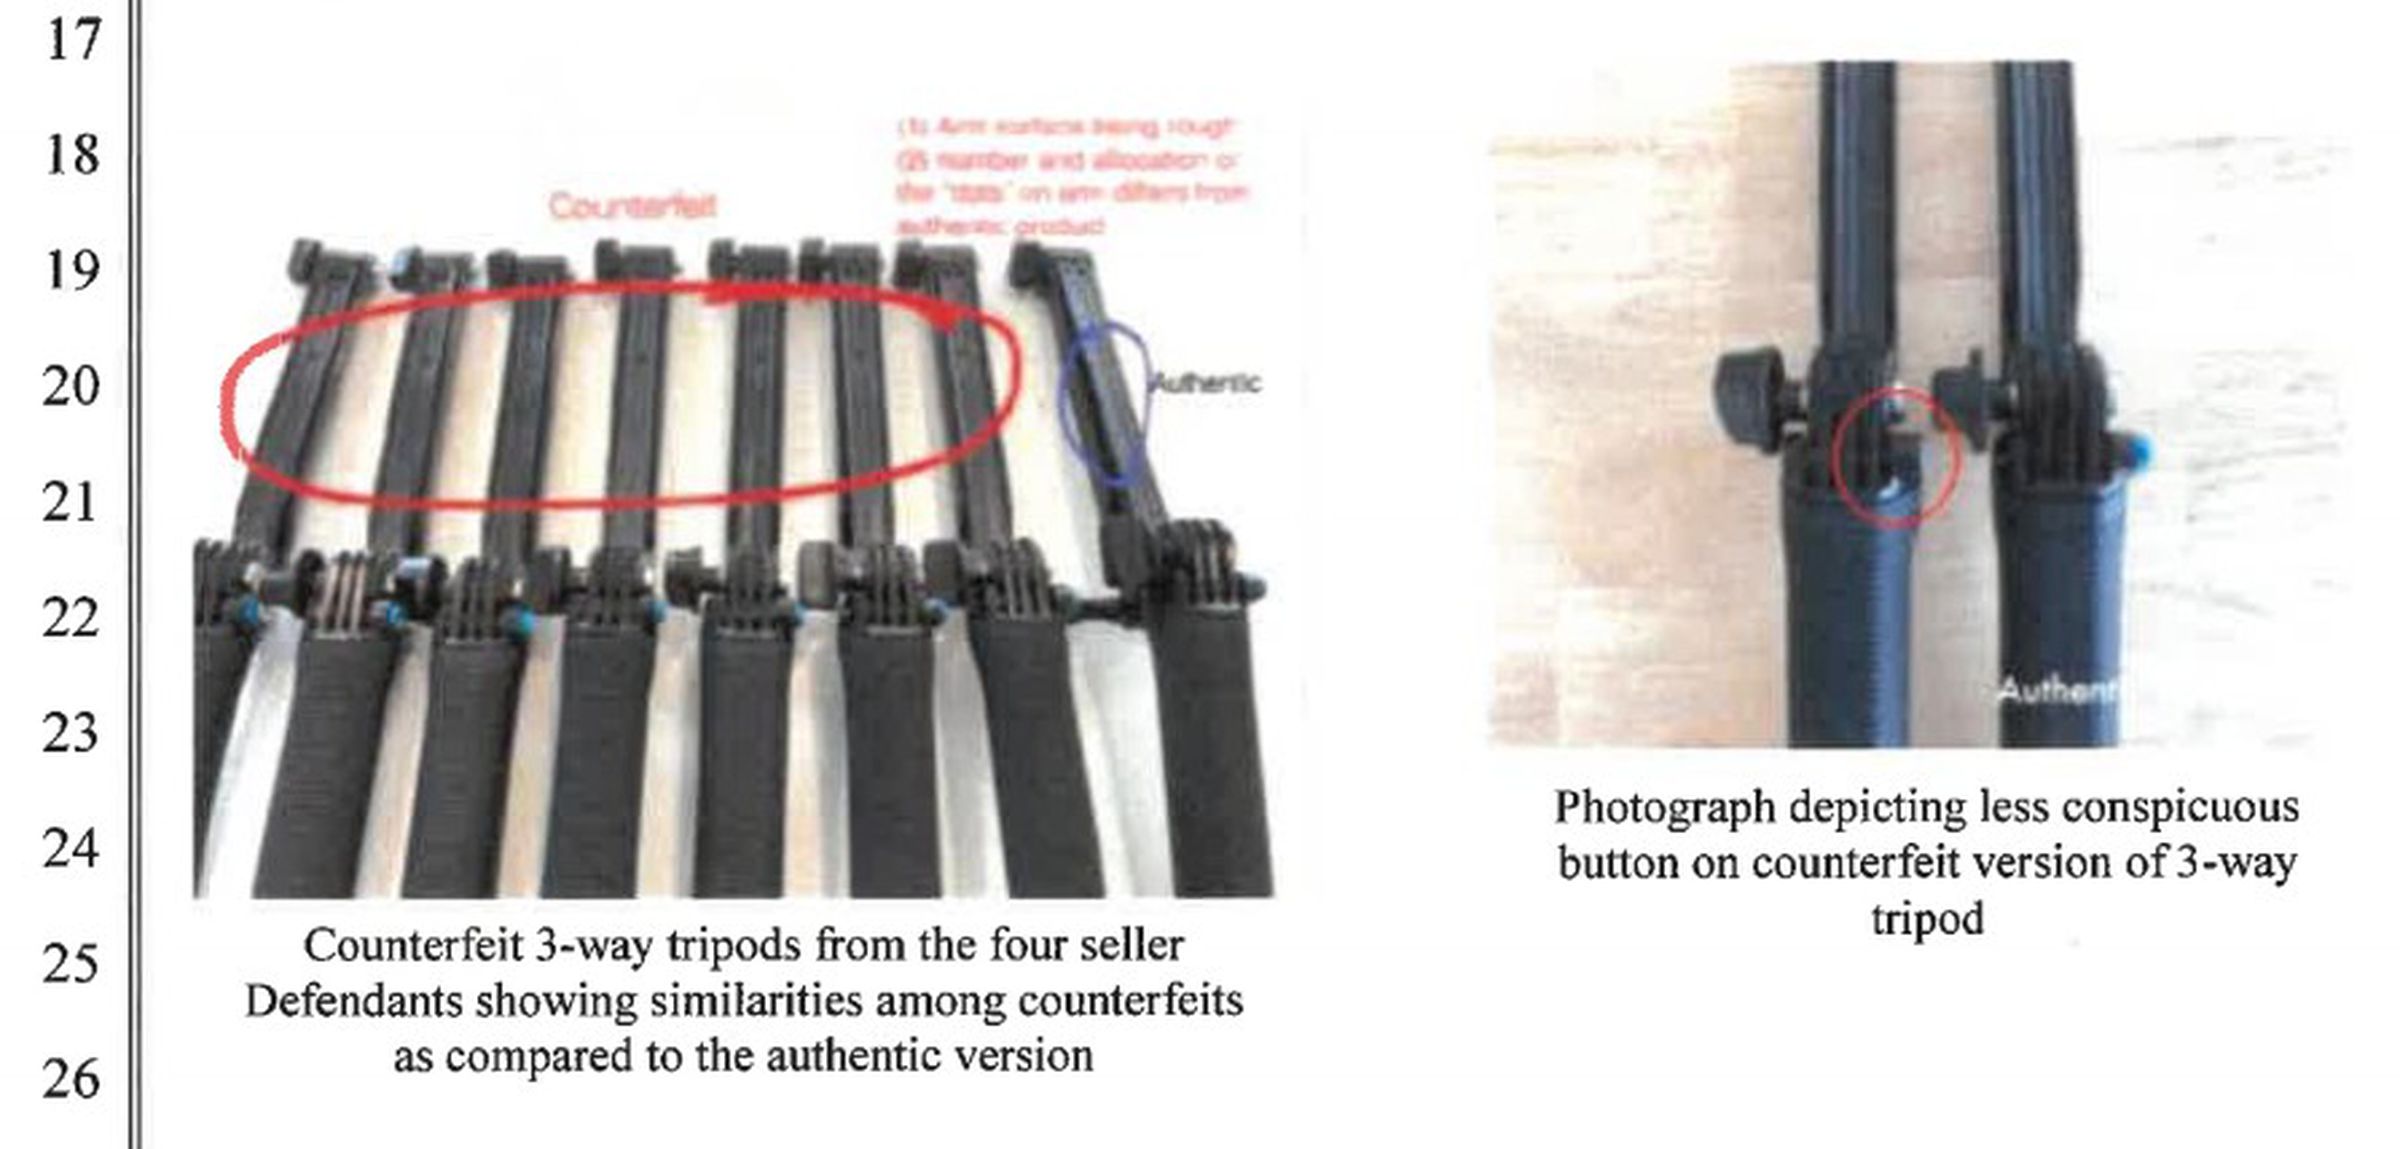 Tripod comparison picture shows a smaller button on the fake, and different patterns of dots.